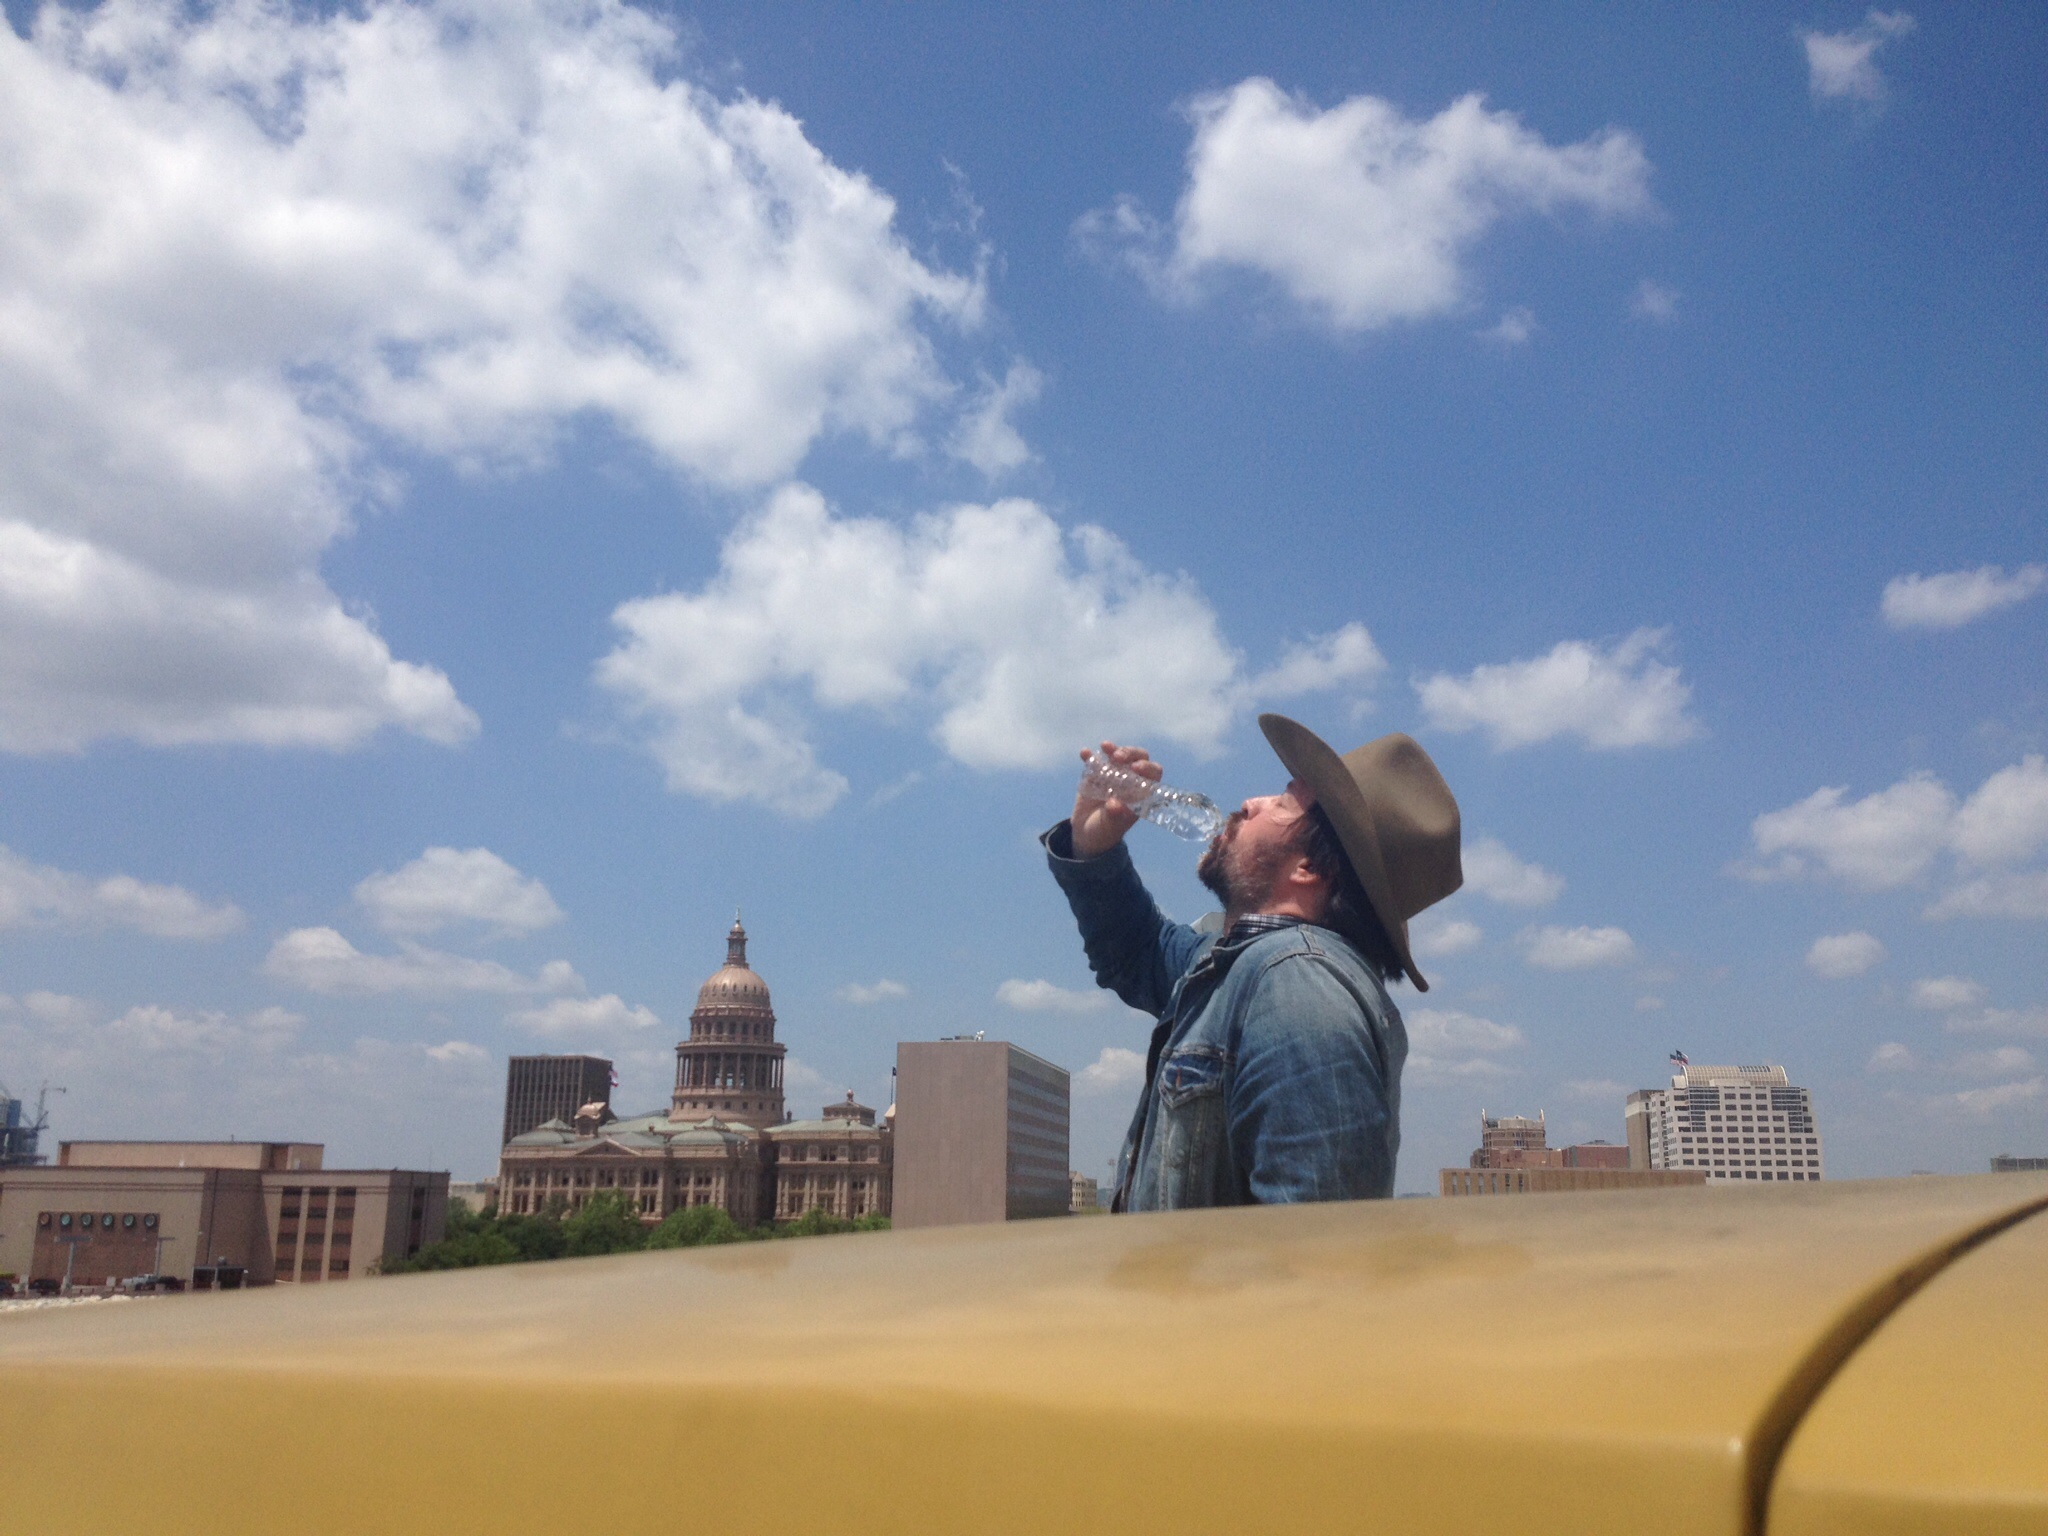 Ford Austin on location in Austin, Texas as Sergio the set of SIX PACK SAM.